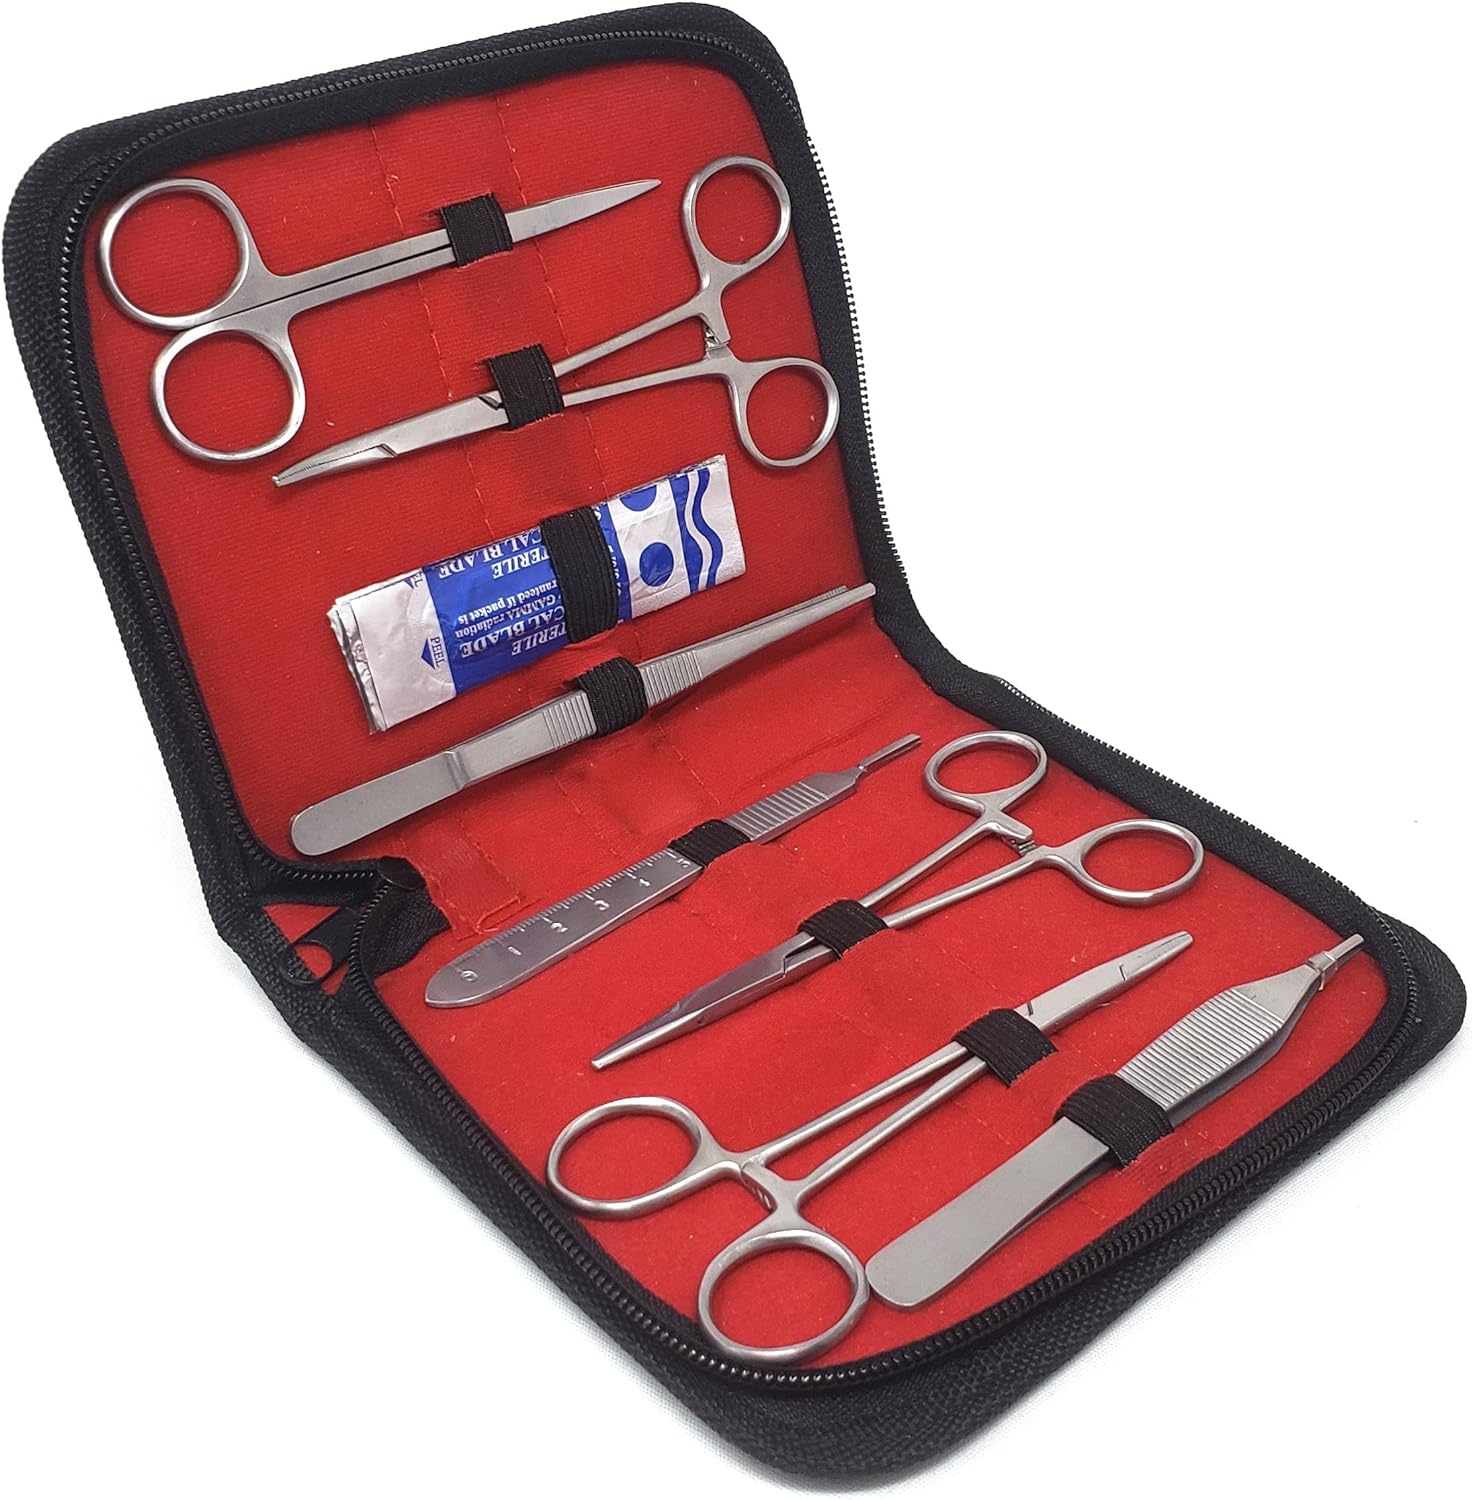 A2Z High Quality 30 Pieces Scissors Forceps Hemostats Needle Holders Suture Student Training Set kit with Case